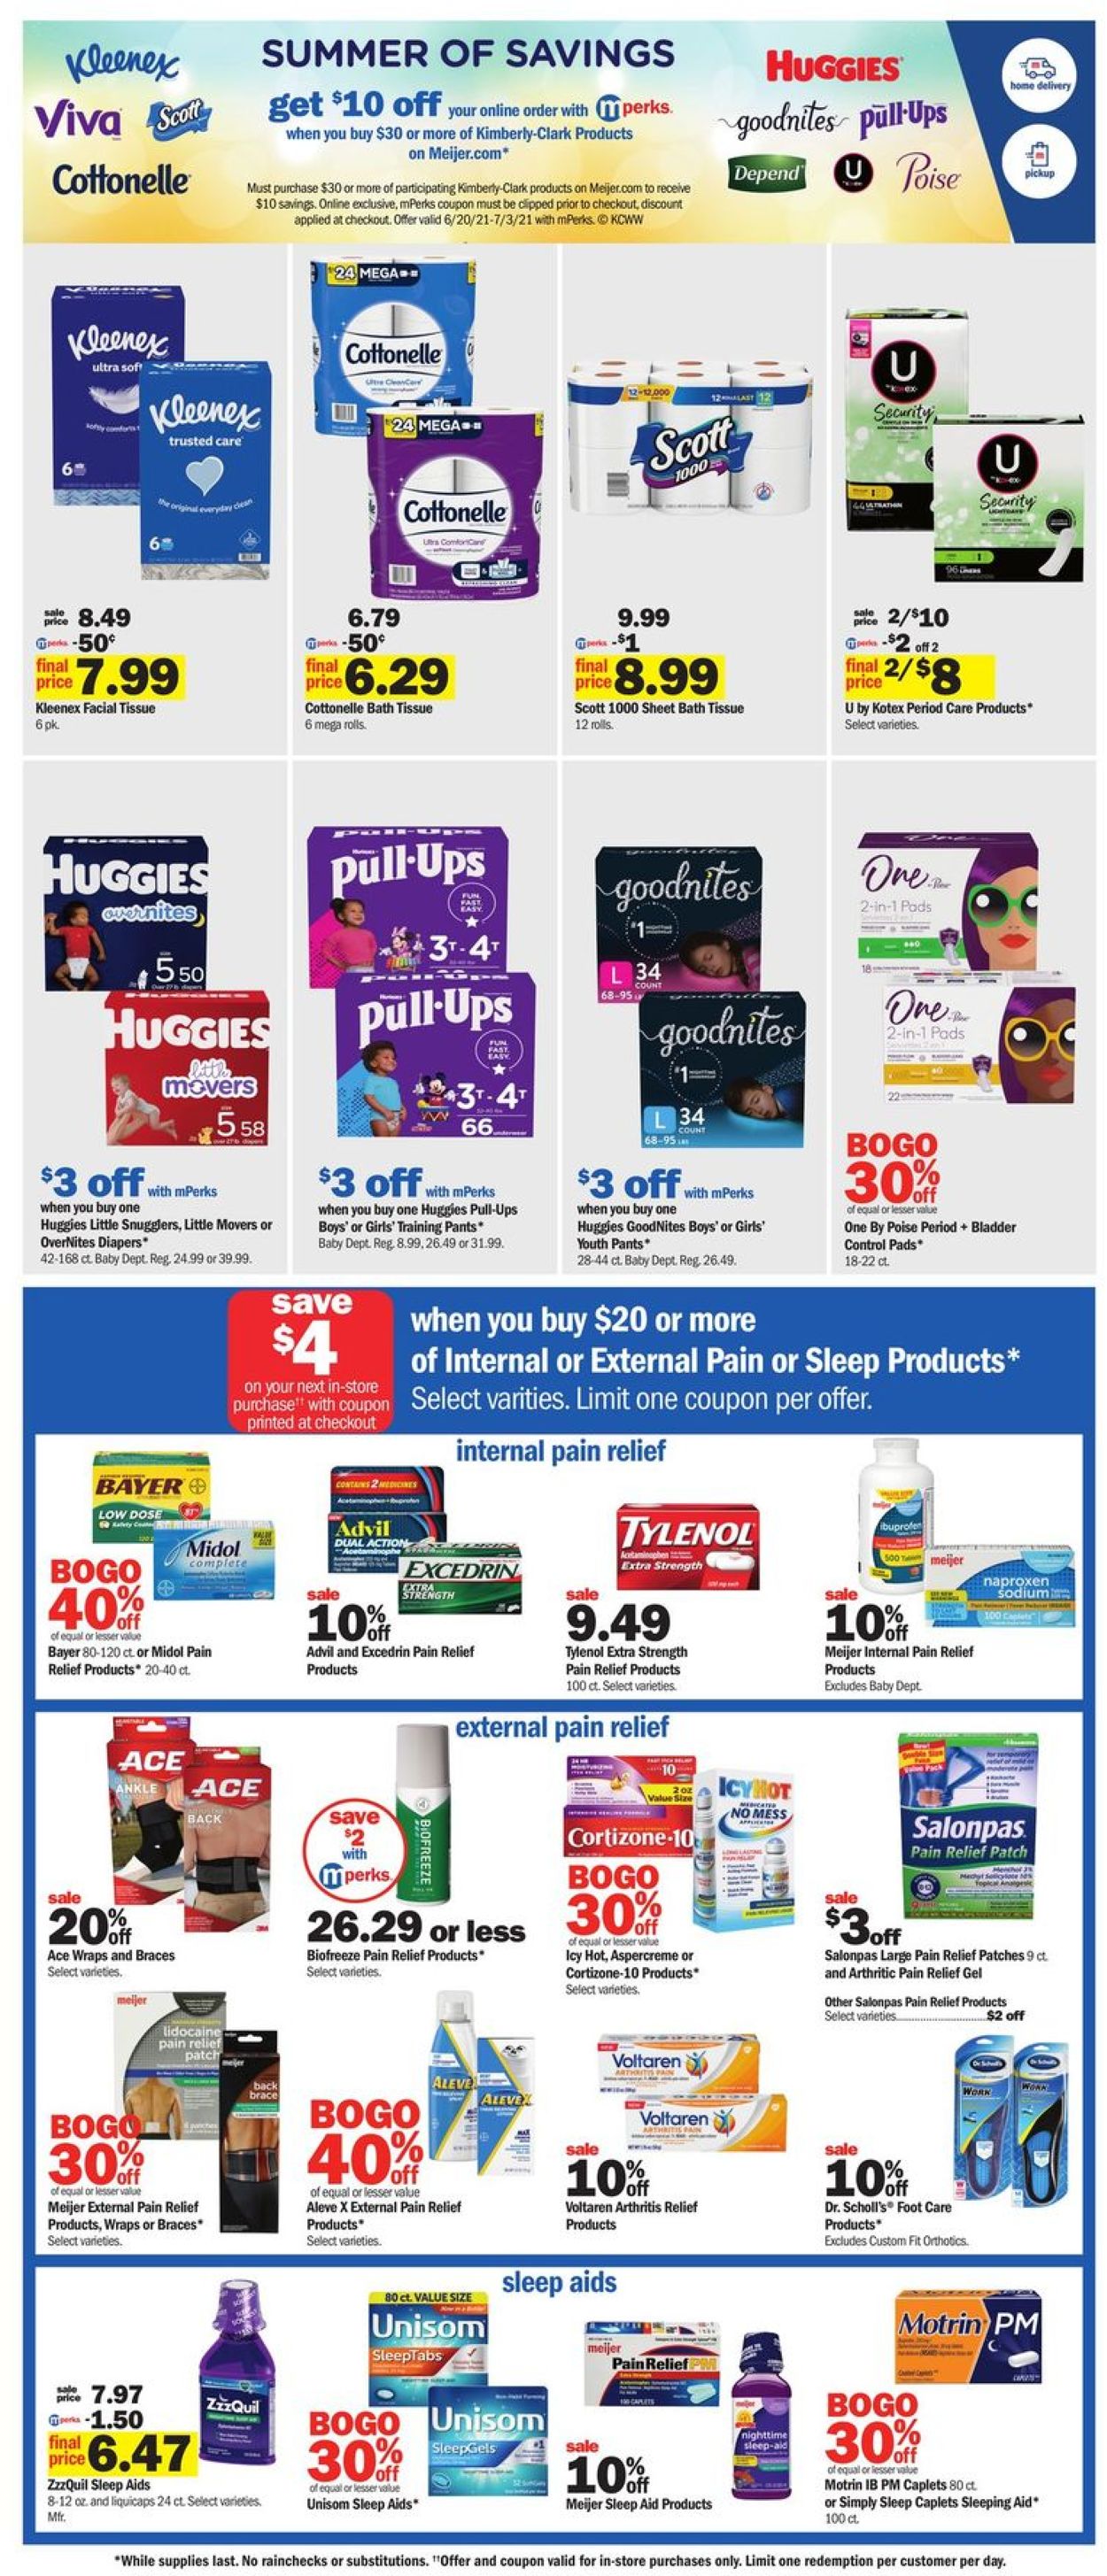 Catalogue Meijer from 06/20/2021